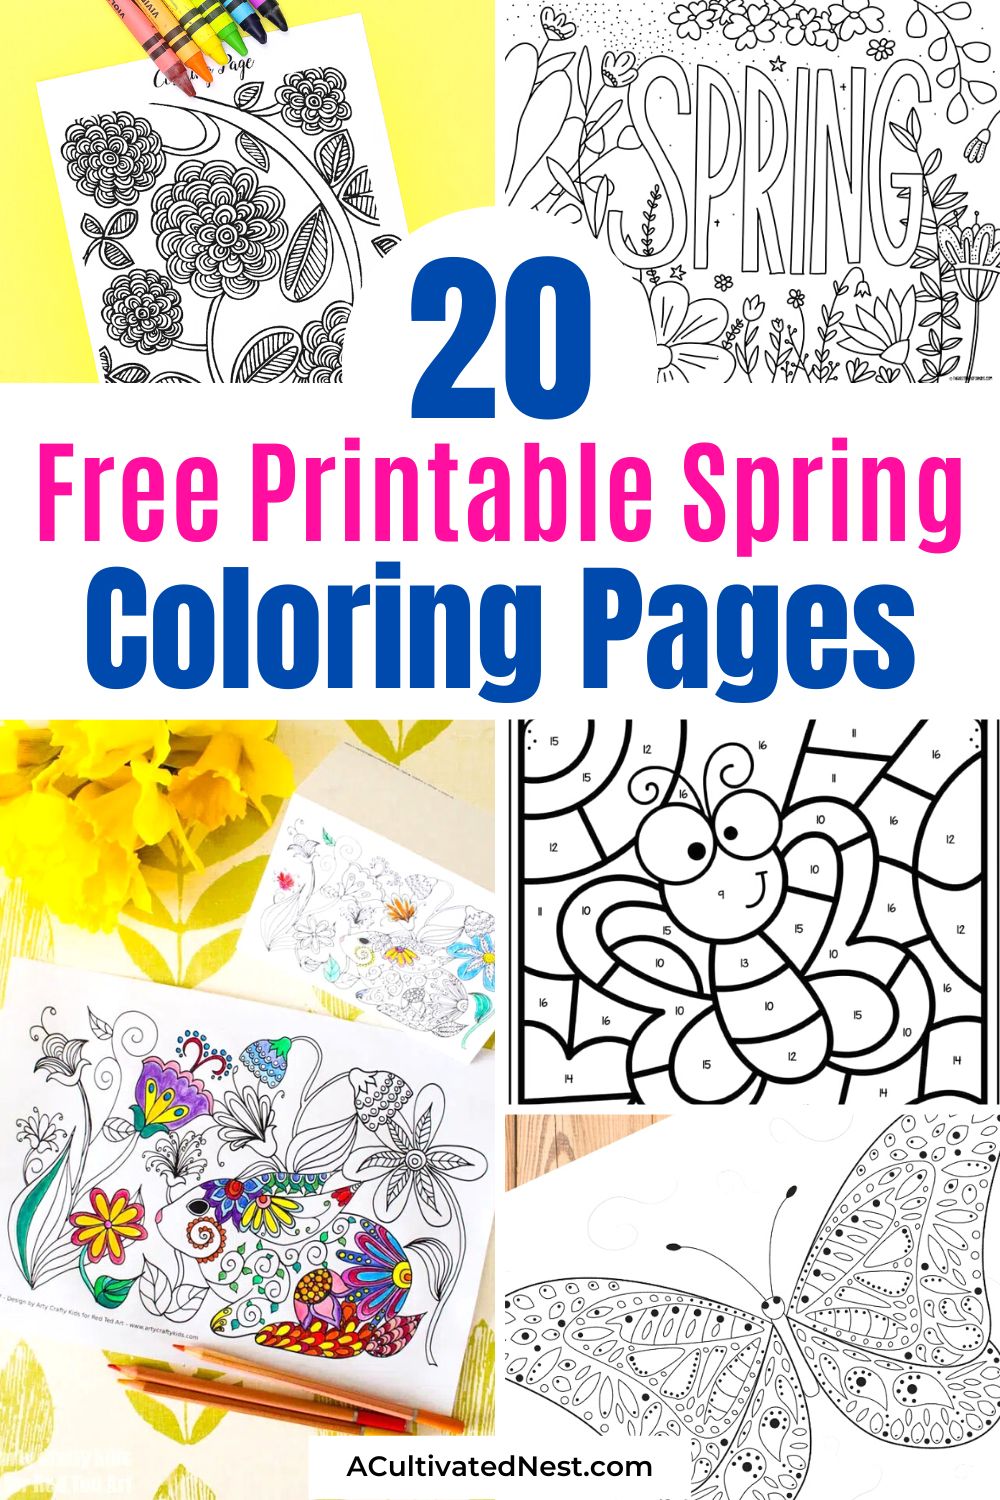 20 Free Printable Spring Coloring Pages- Spring has sprung! Keep your kids and yourself entertained with these free printable spring coloring pages. From blooming flowers to chirping birds, these pages are full of springtime fun! | #freePrintables #coloringPages #coloringPrintables #adultColoring #ACultivatedNest